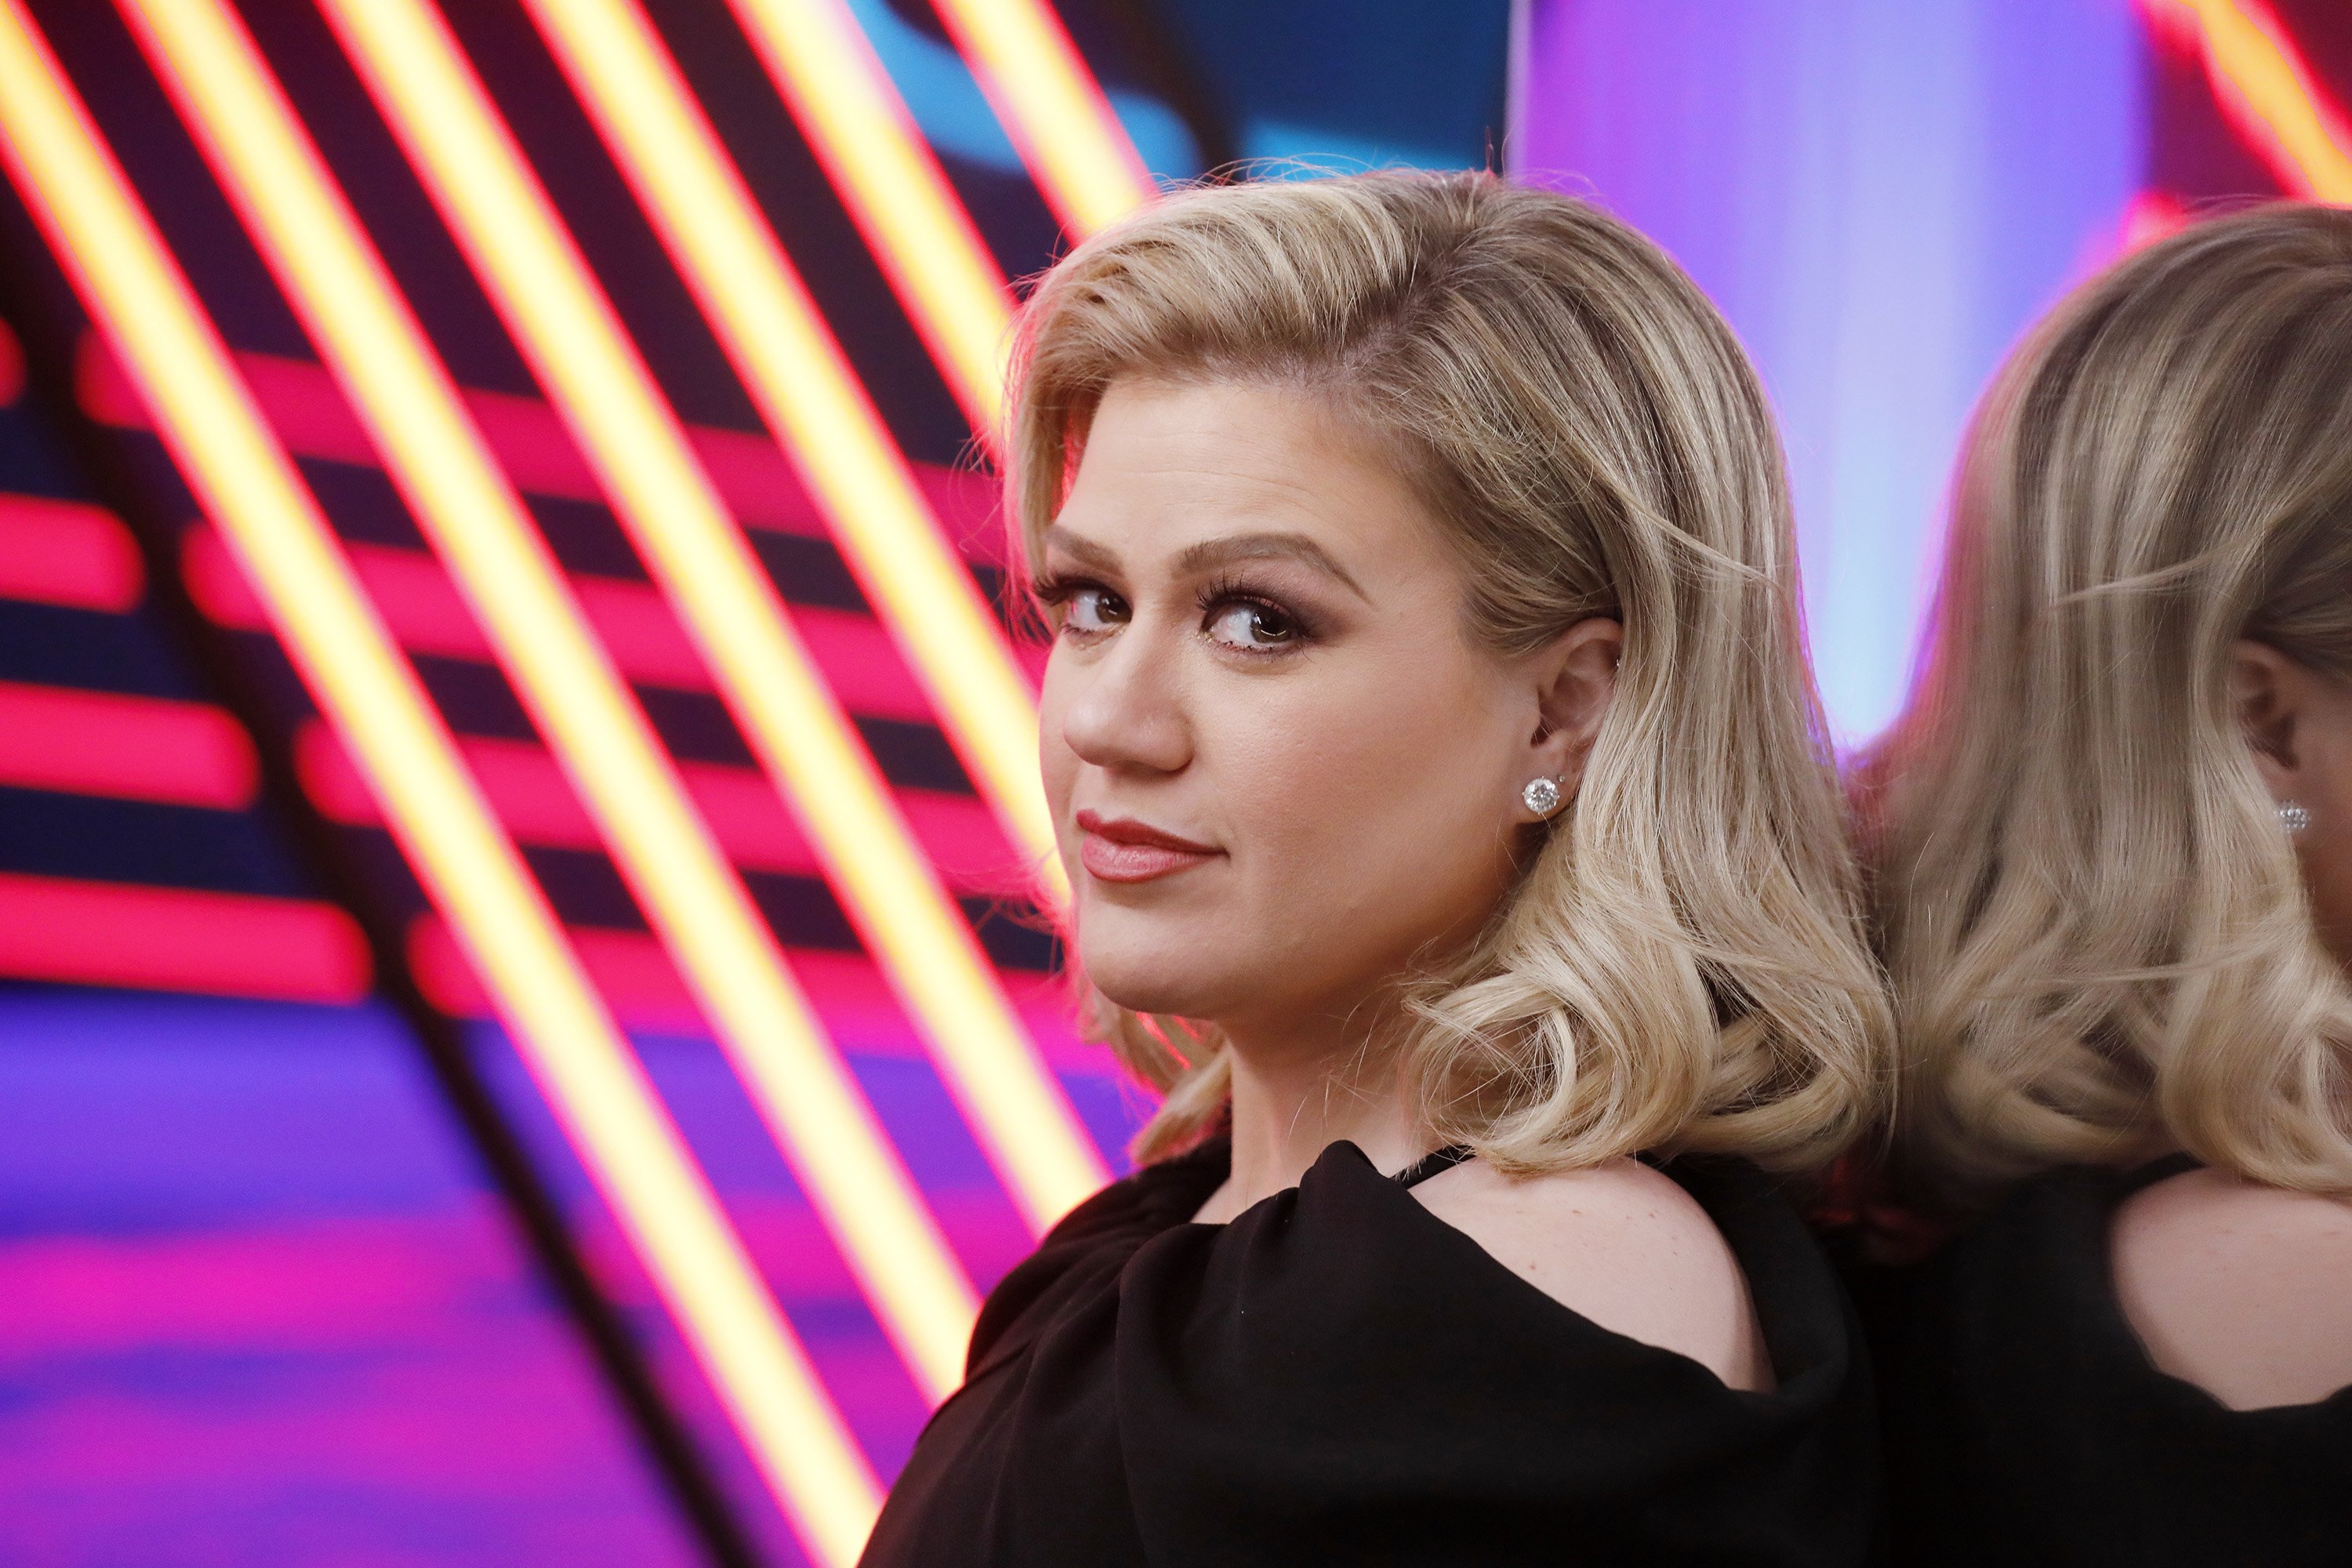 Kelly Clarkson photographed behind the scene of "The Voice" in 2019. | Source: Getty Images 